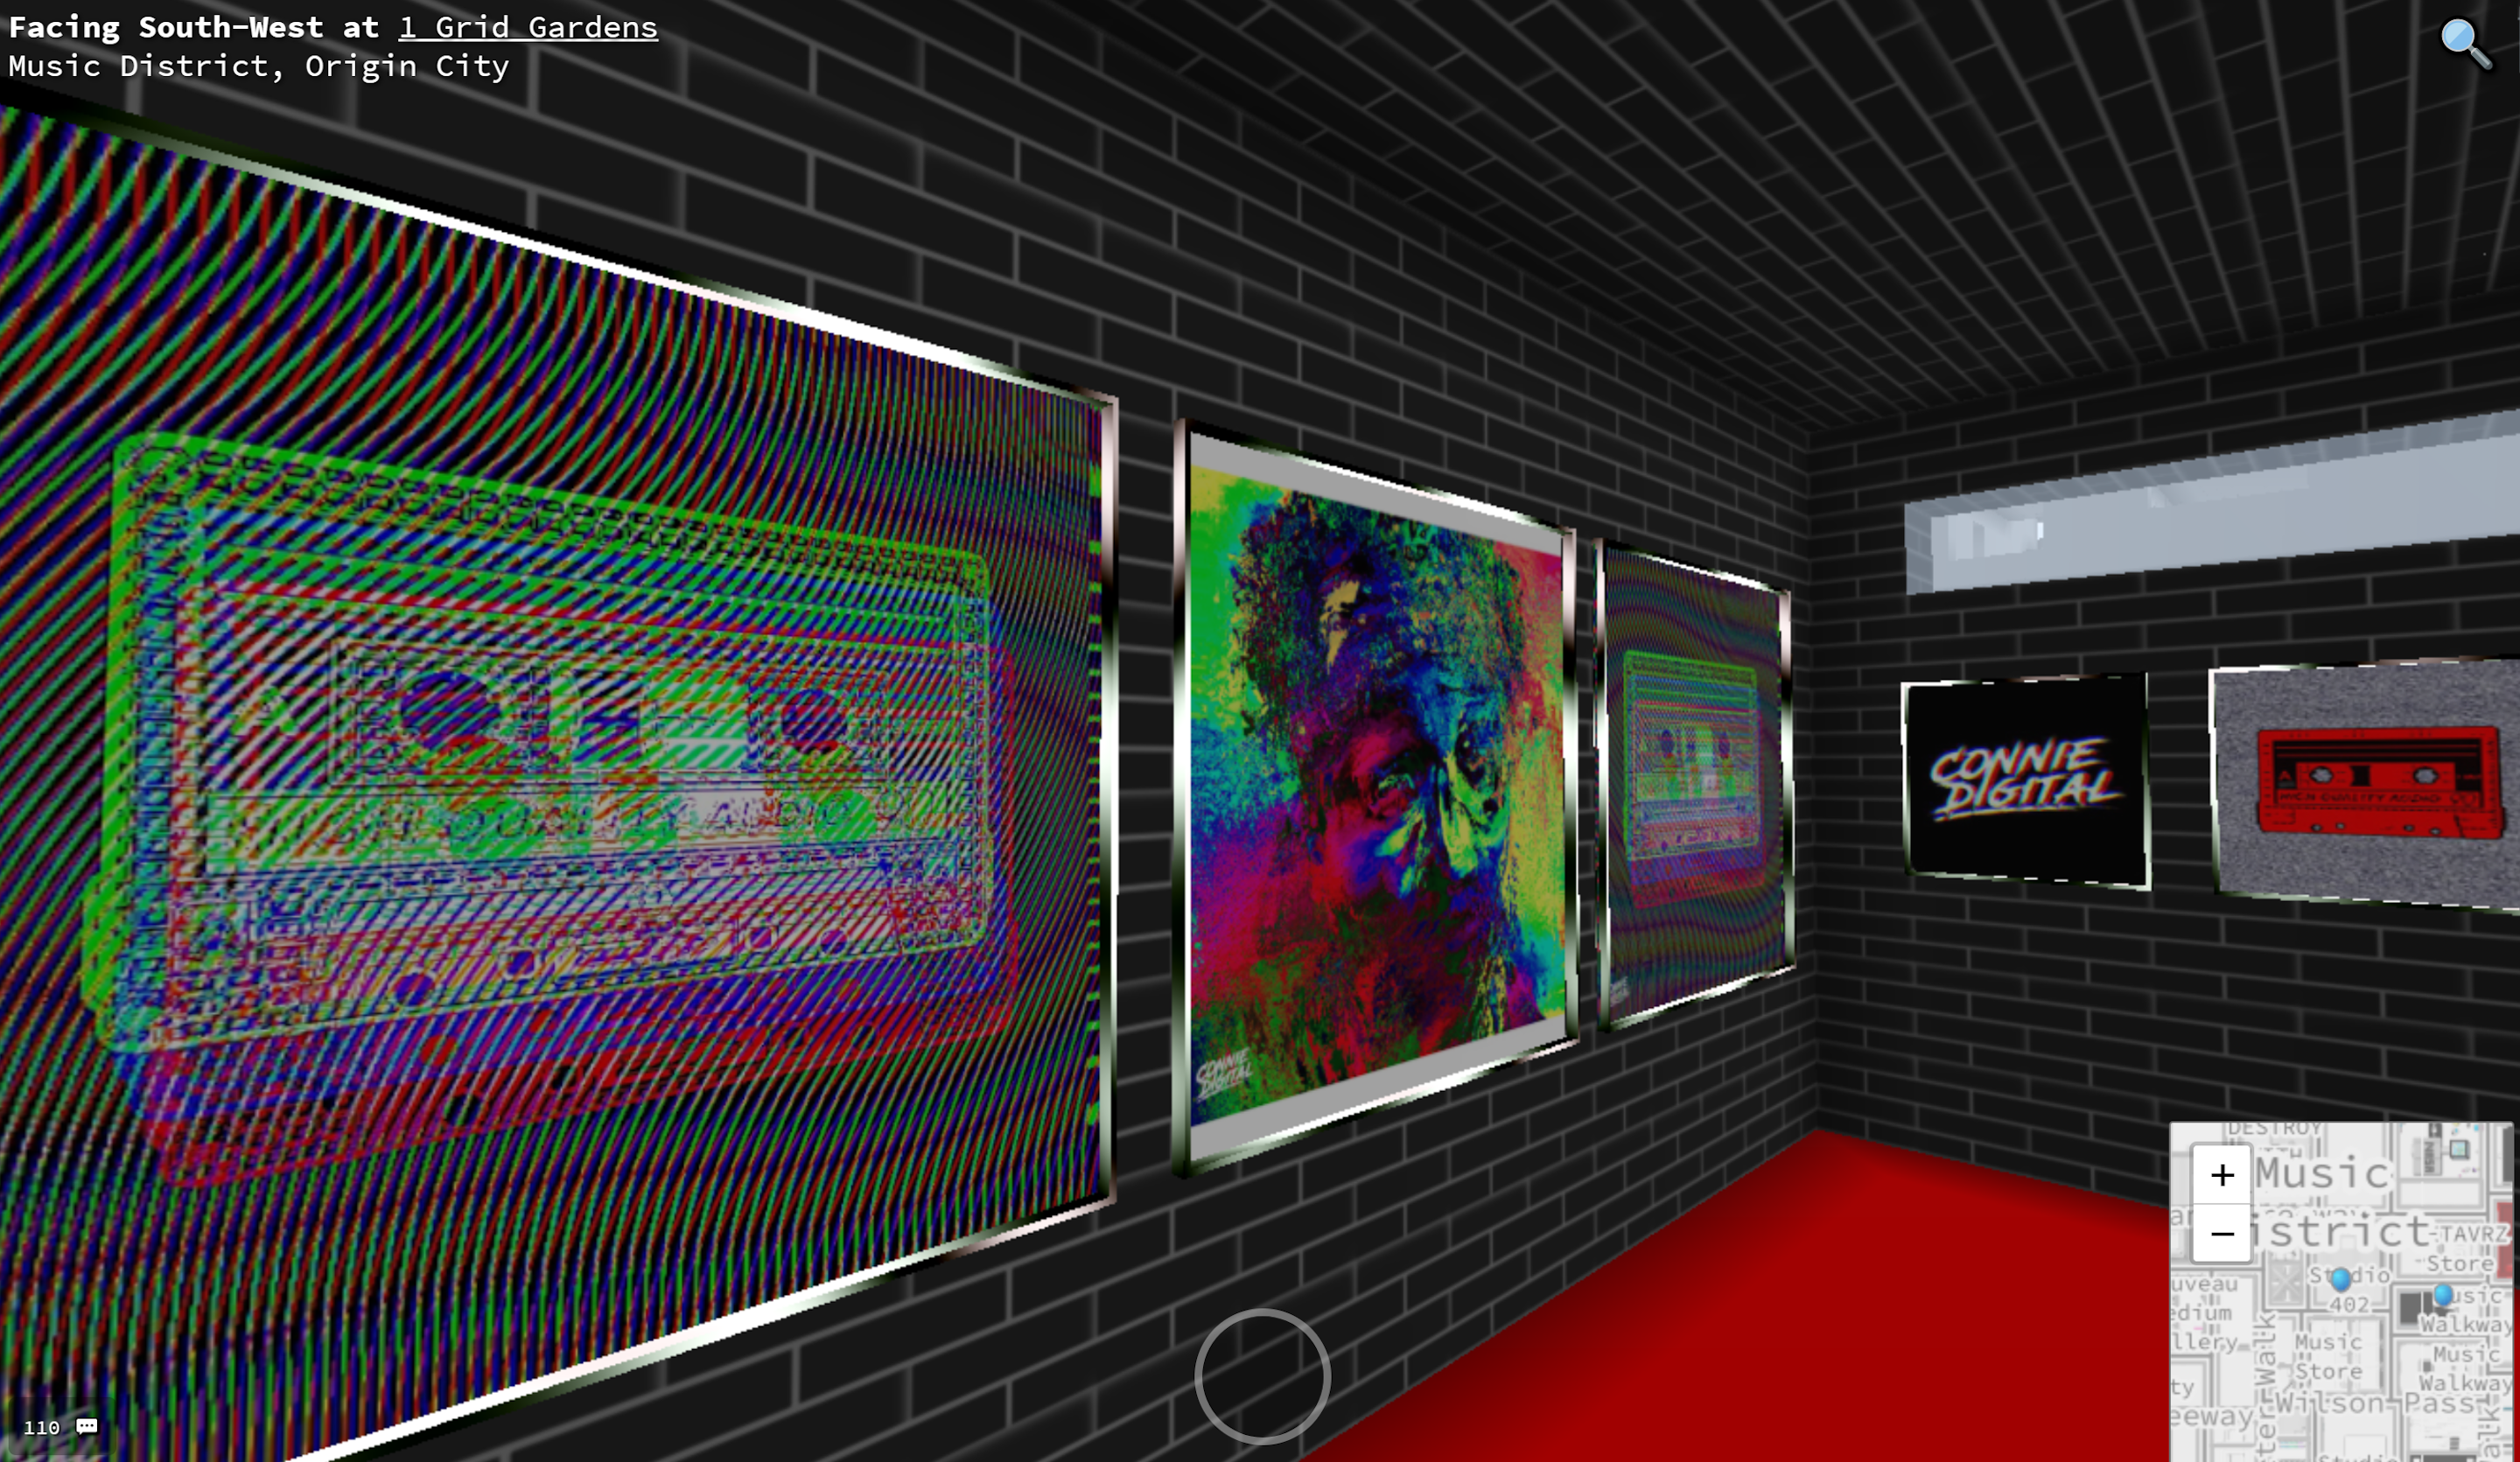 Connie Digital Cryptovoxels VR Art Gallery on Ethereum